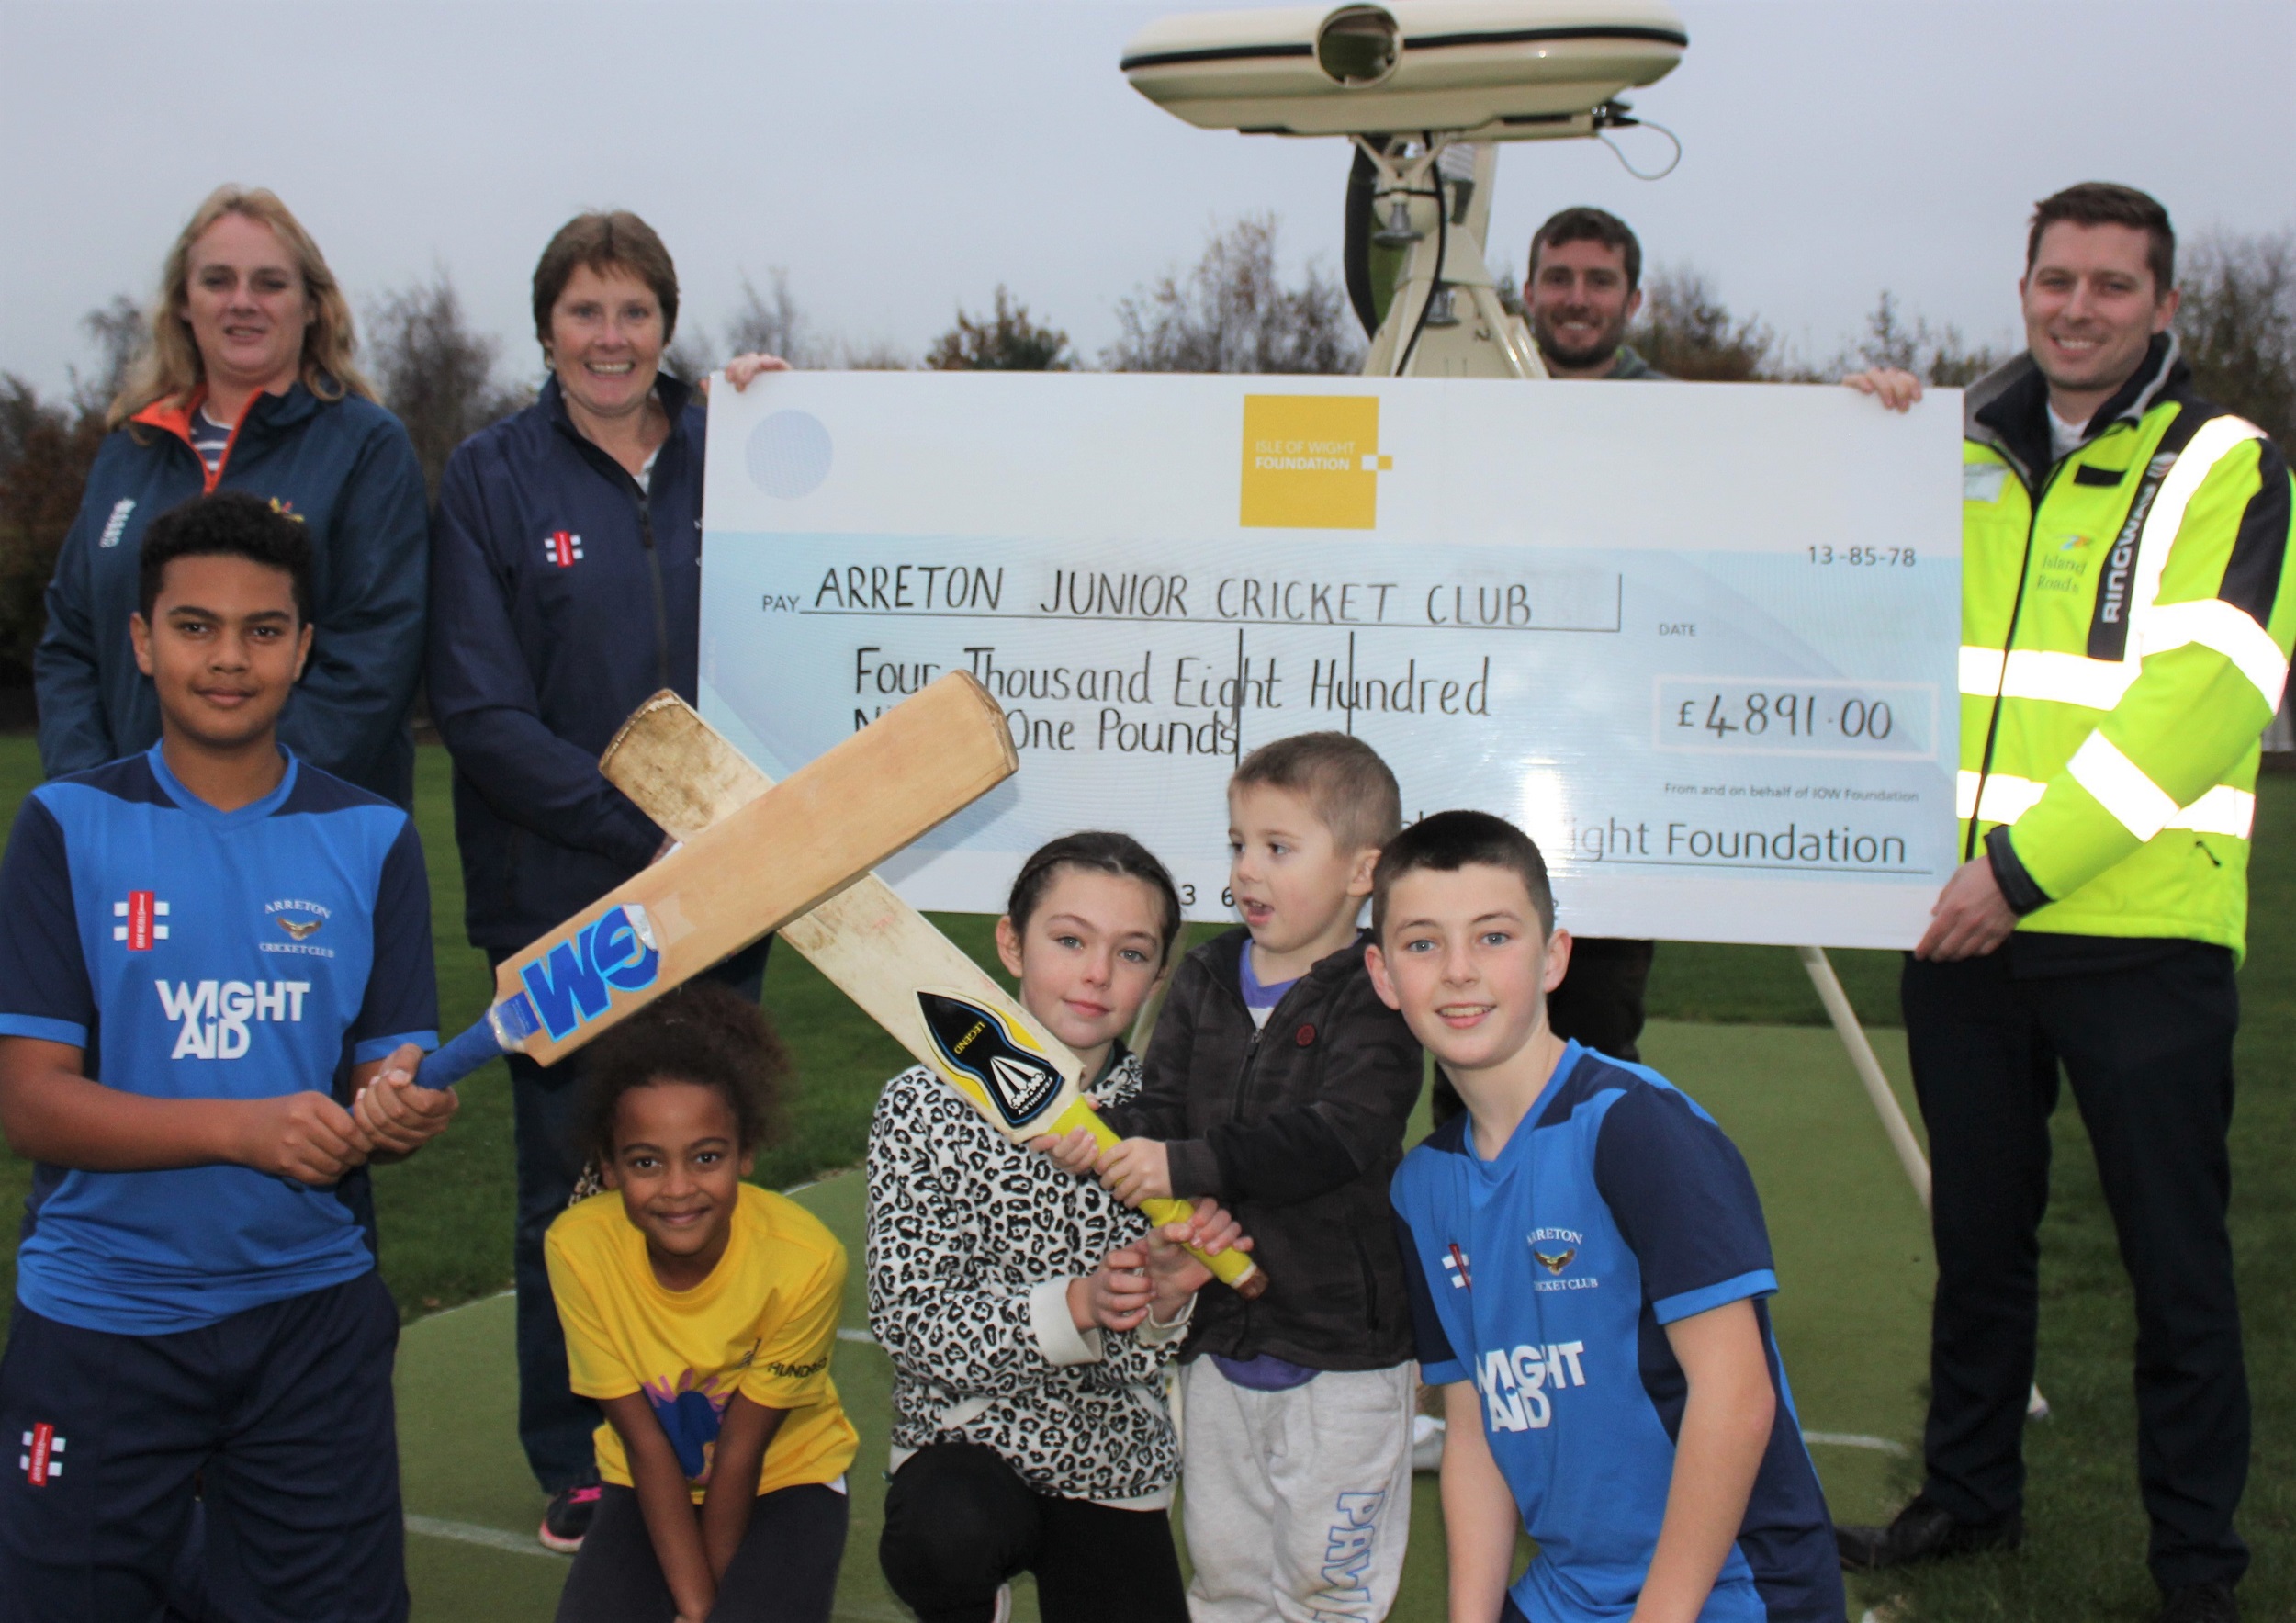 group of people holding a large cheque for £4,891 for Arreton Junior Cricket Club, children holding cricket bats in foreground